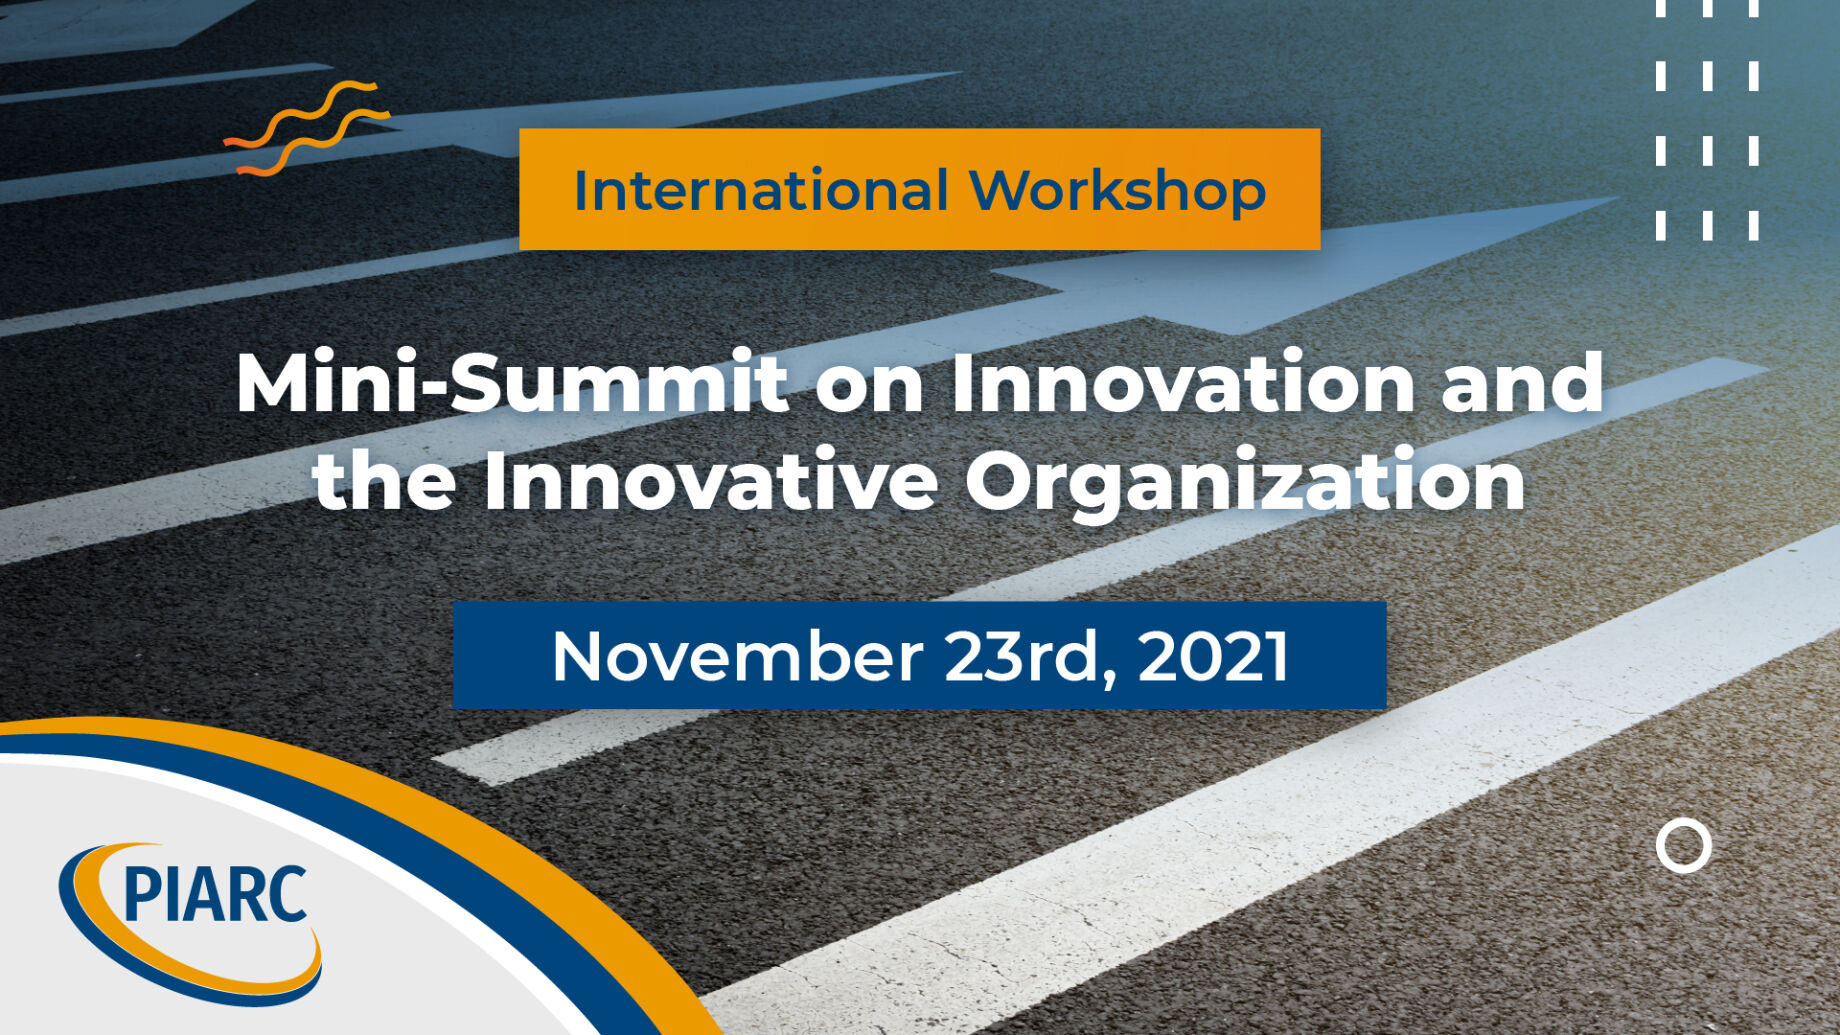 Do you want to know more about innovation in the transport sector? Register for the PIARC international seminar "Innovation and Innovative Organizations"